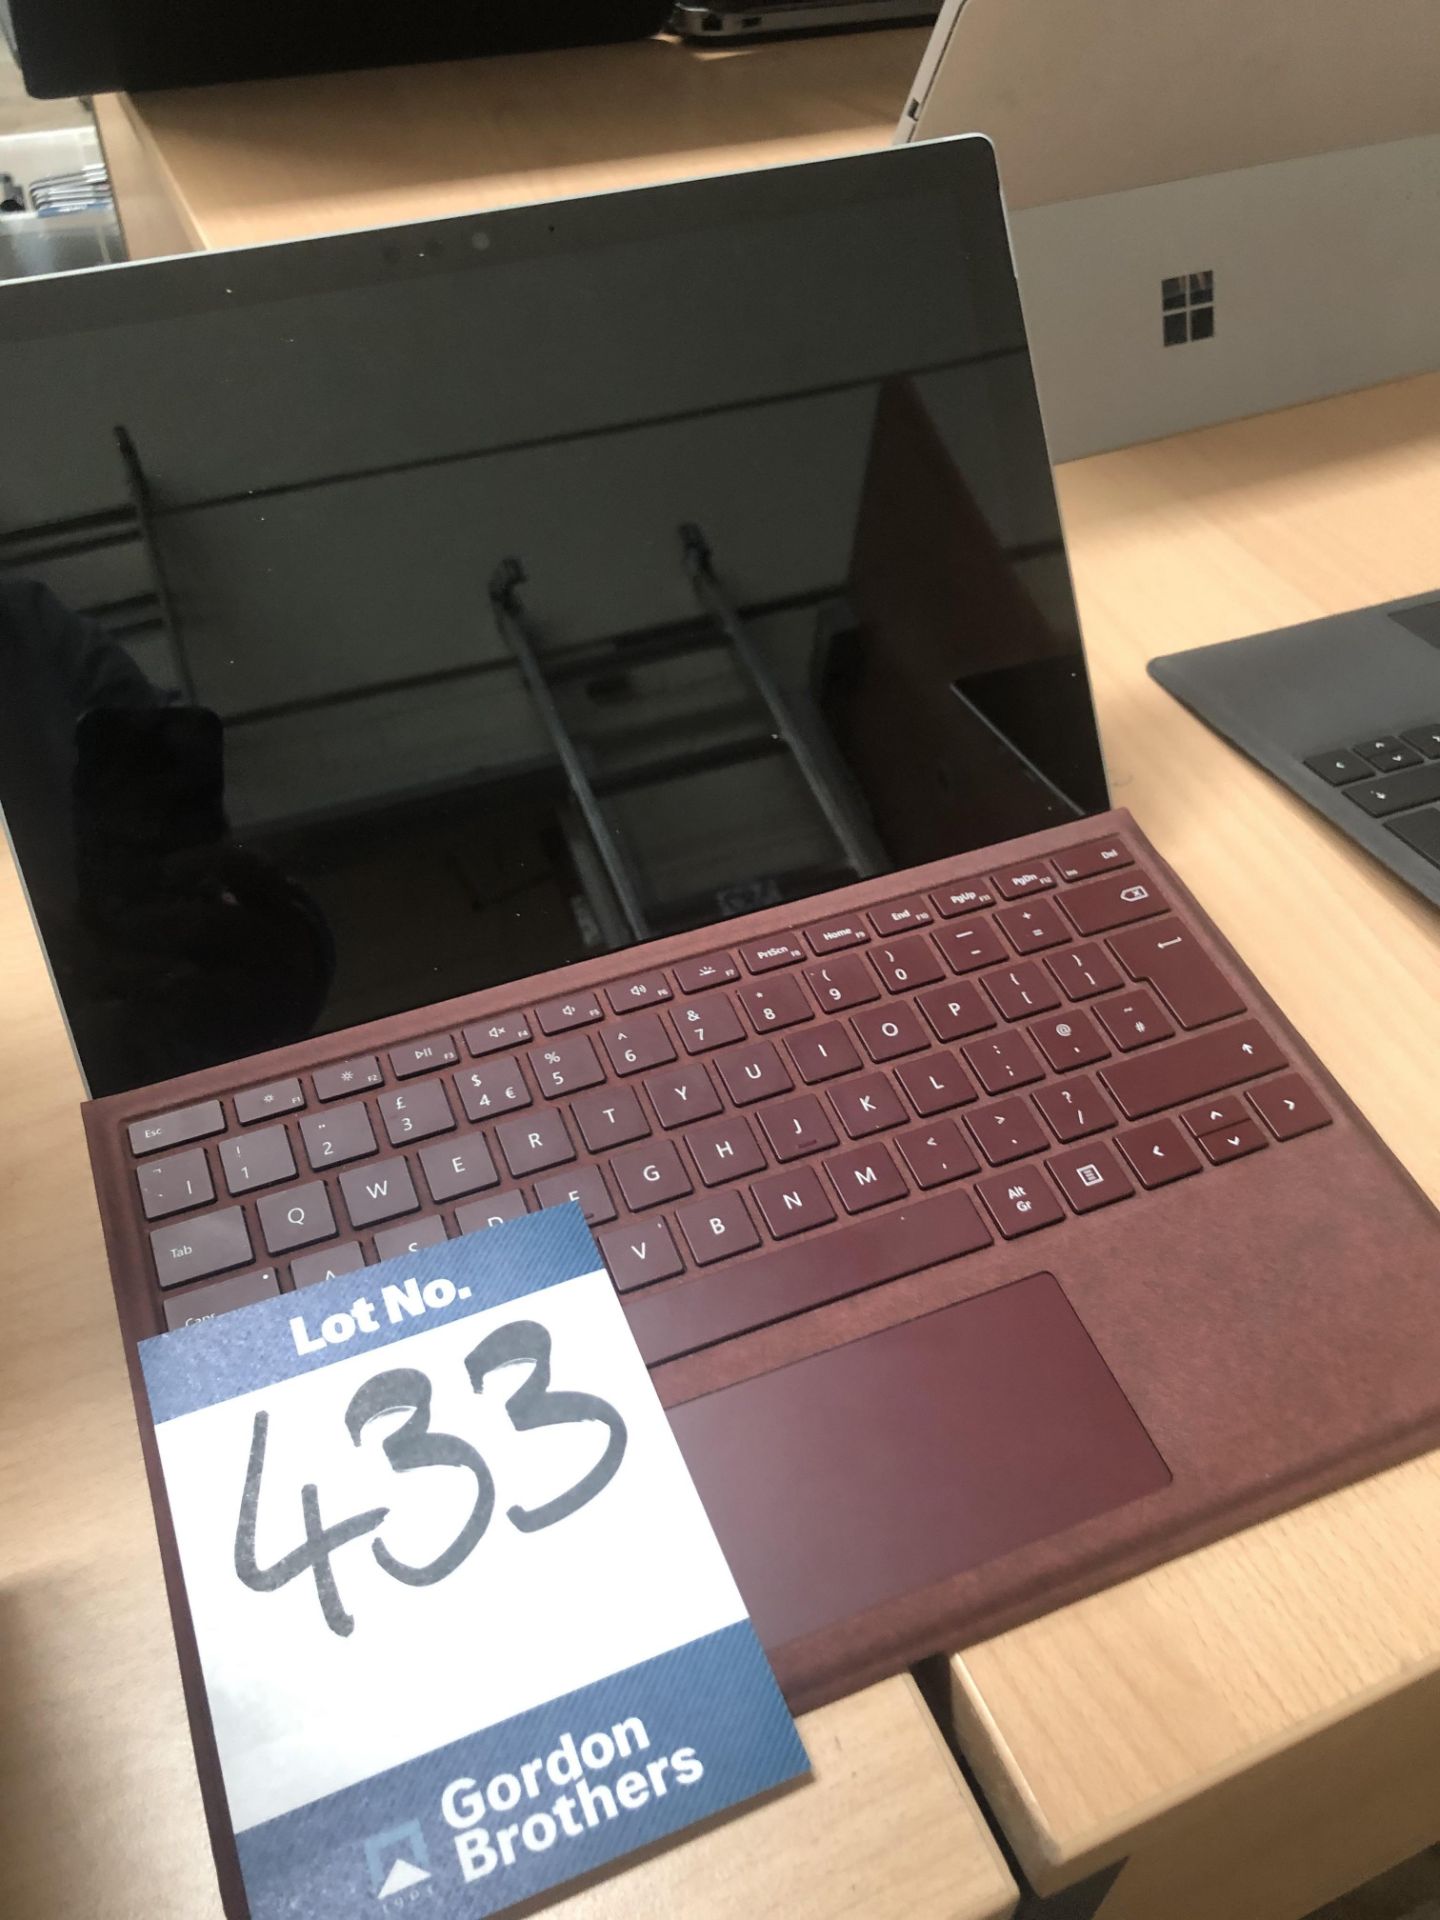 Windows Surface Pro tablet and keyboard (1796/256GB)